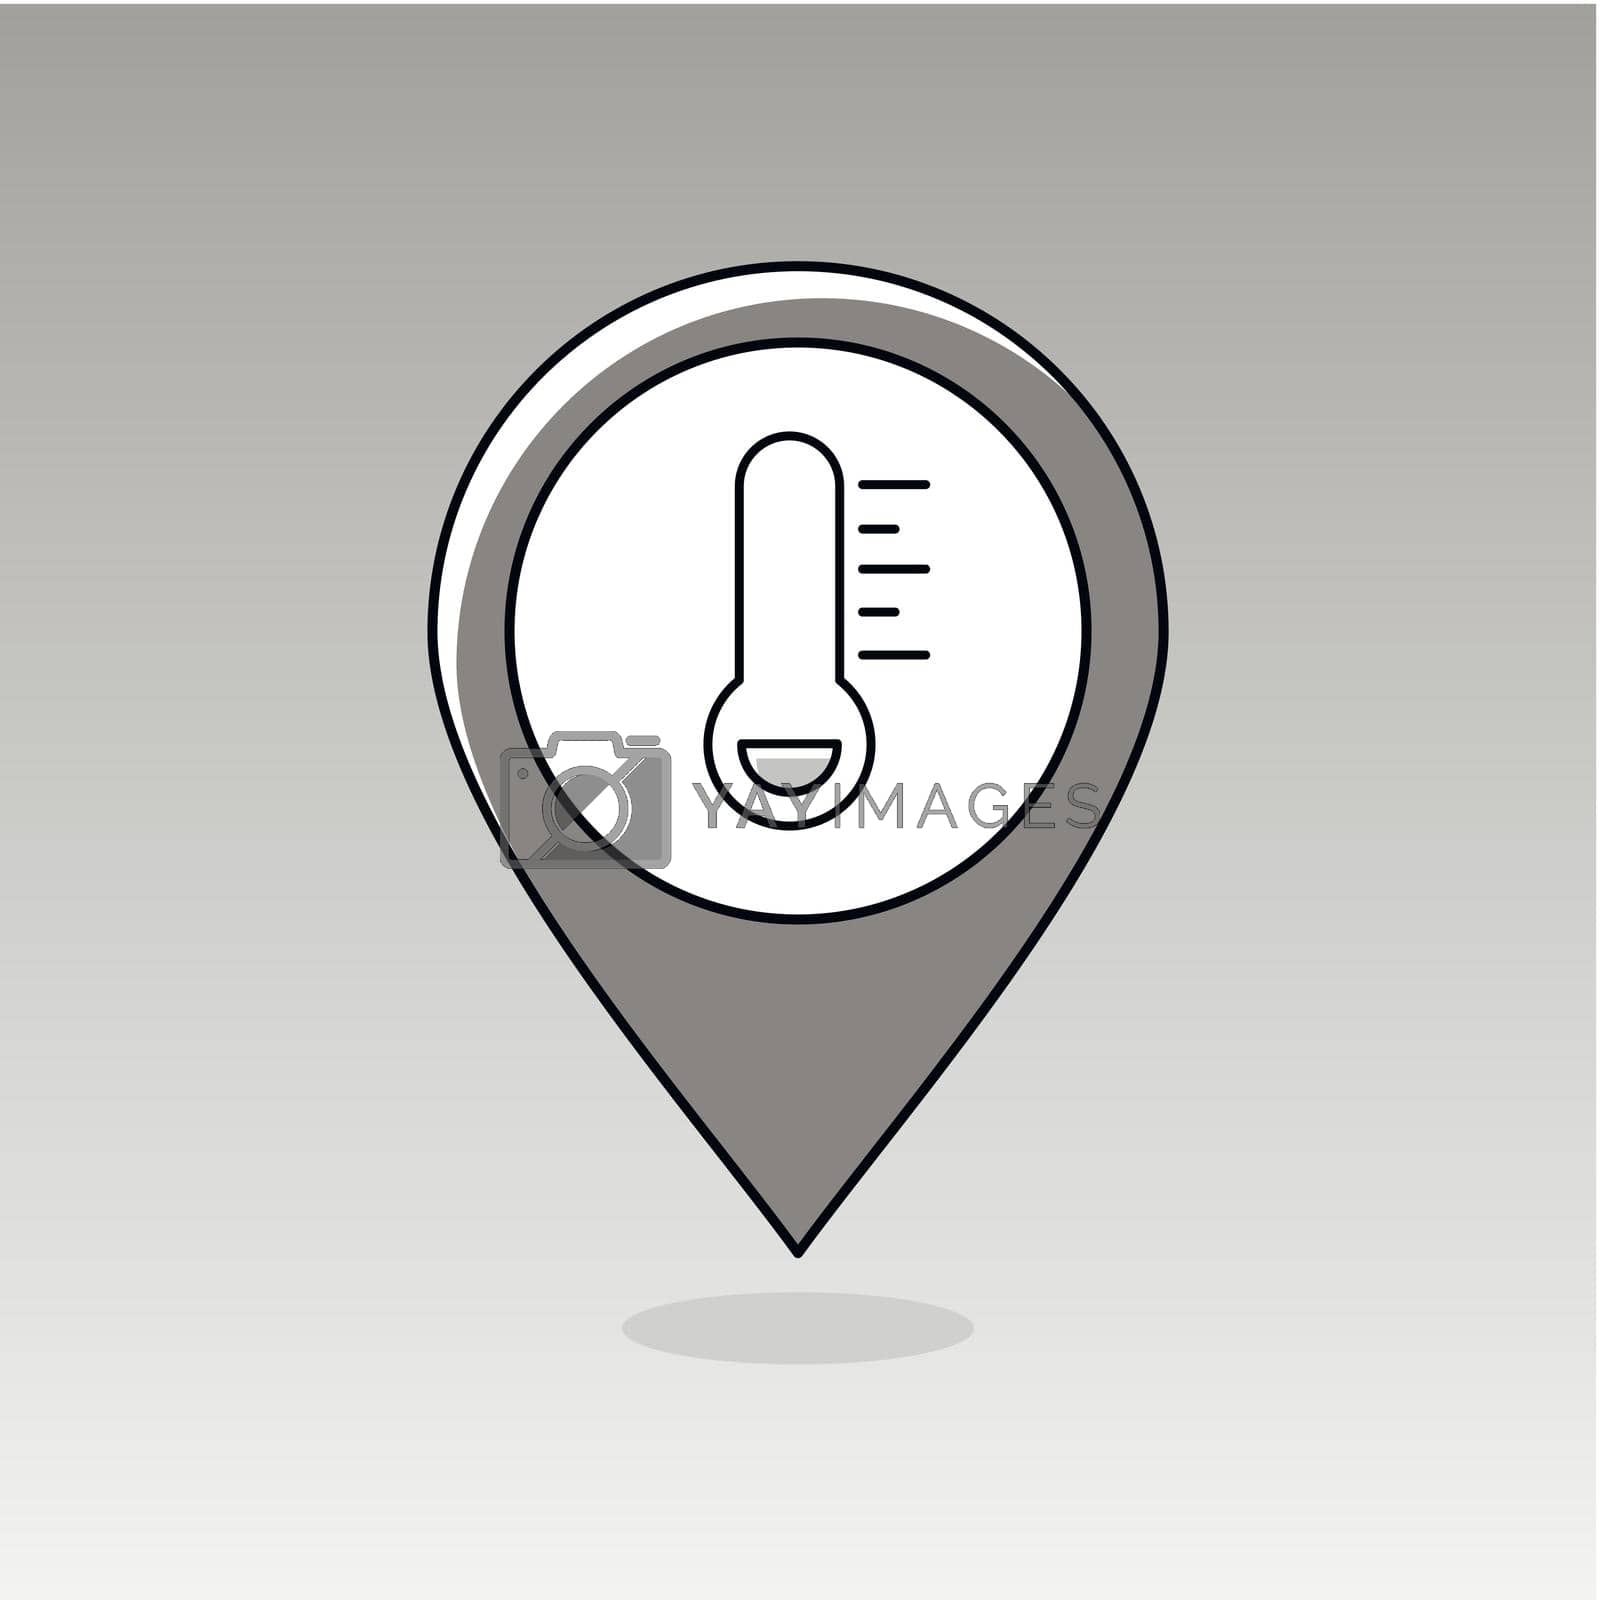 Thermometer Frost Cold outline pin map icon. Map pointer. Map markers. Meteorology. Weather. Vector illustration eps 10